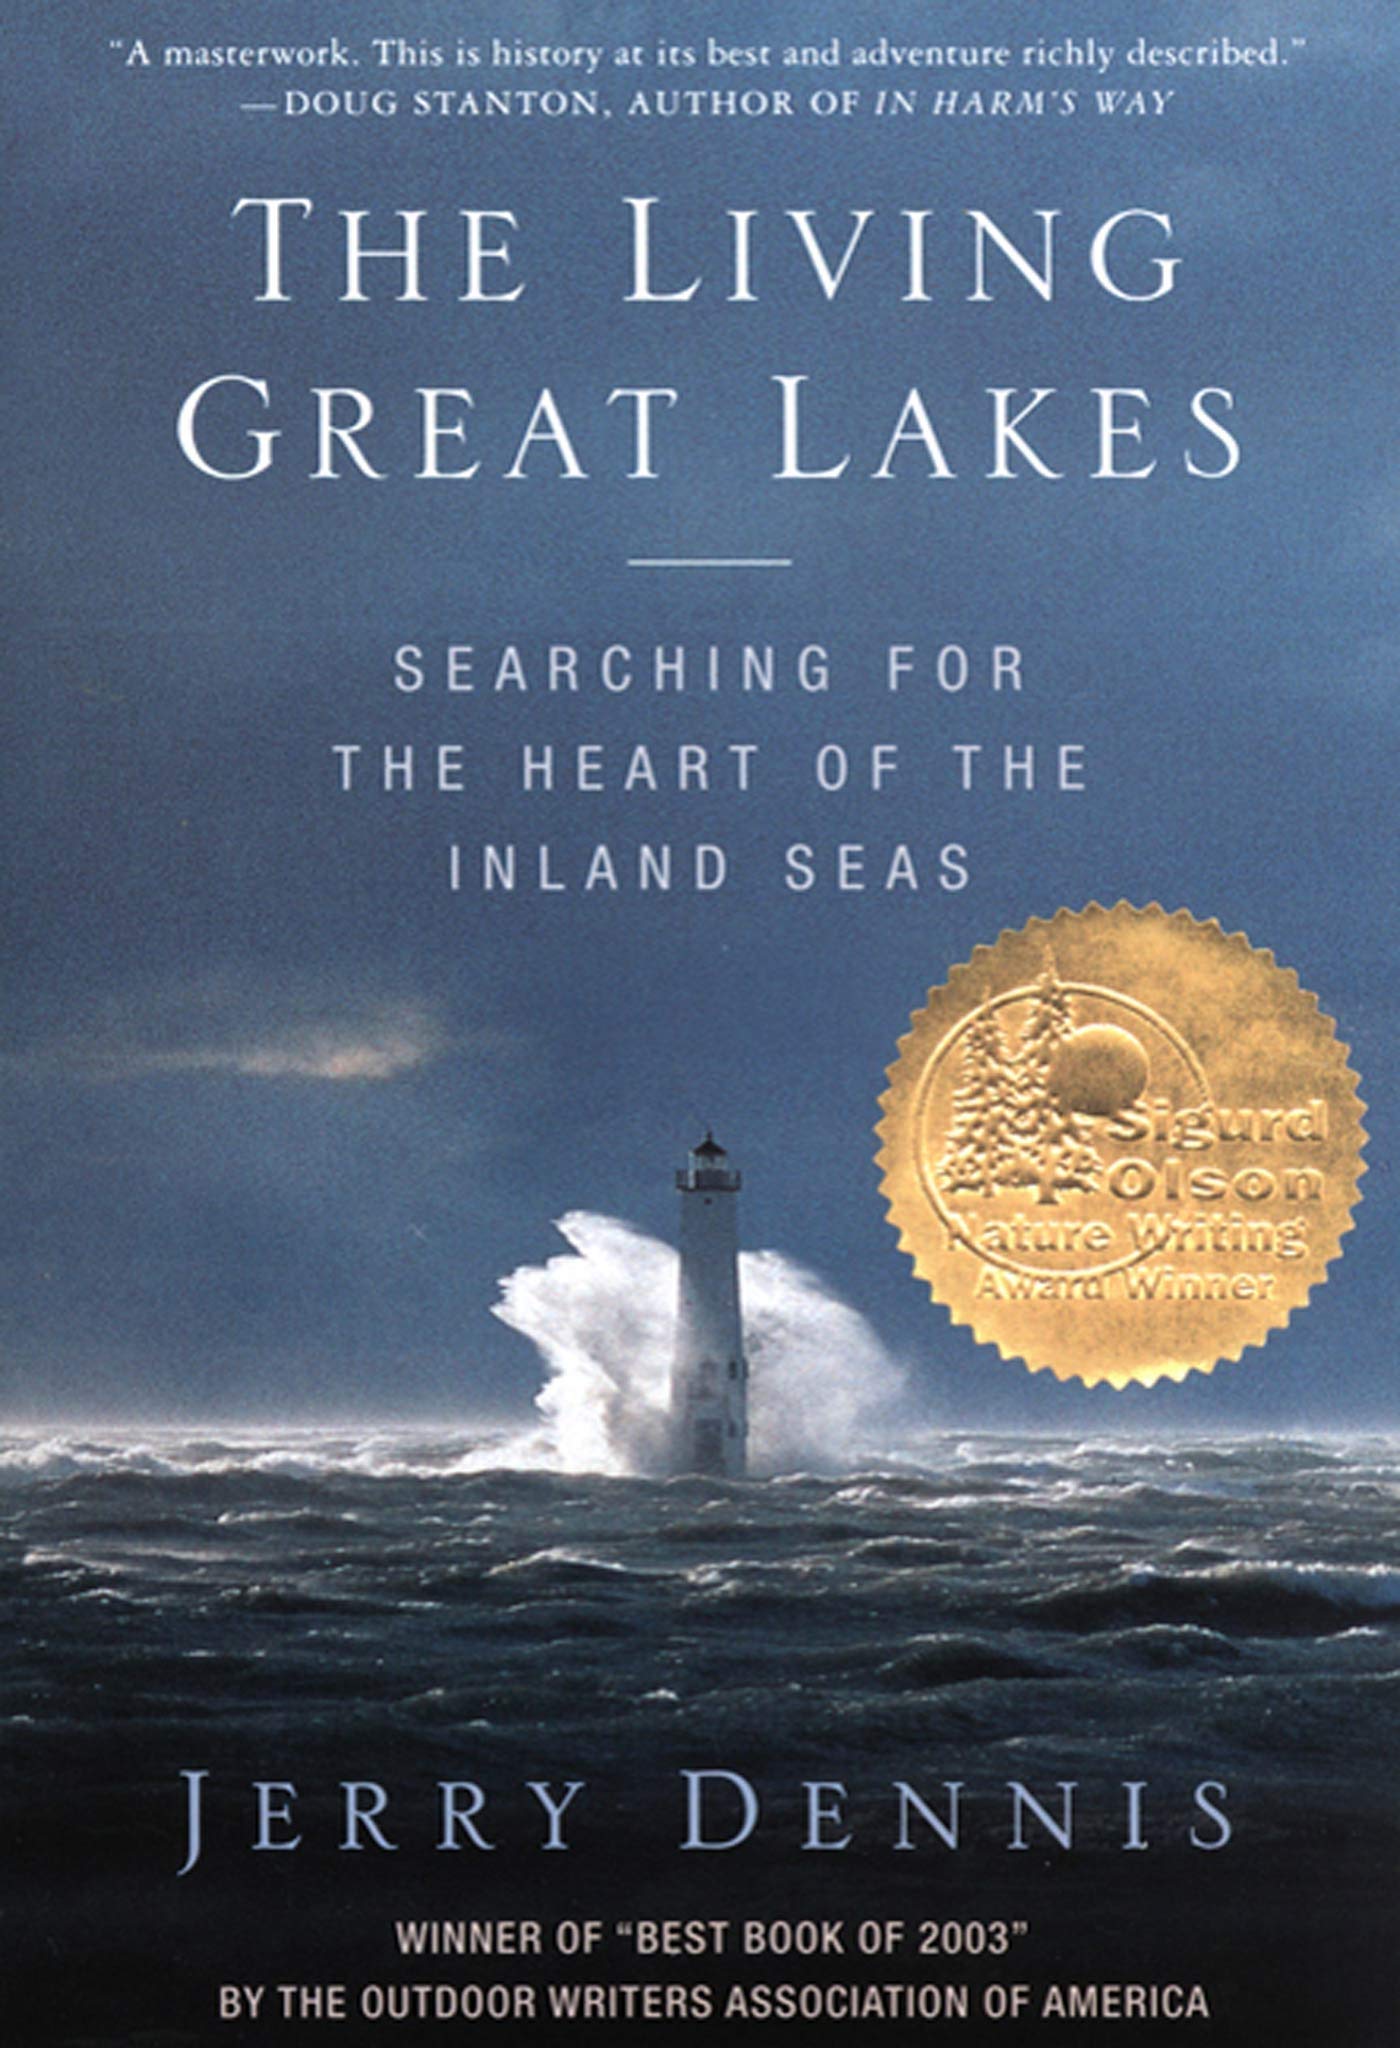 The Living Great Lakes (Paperback)